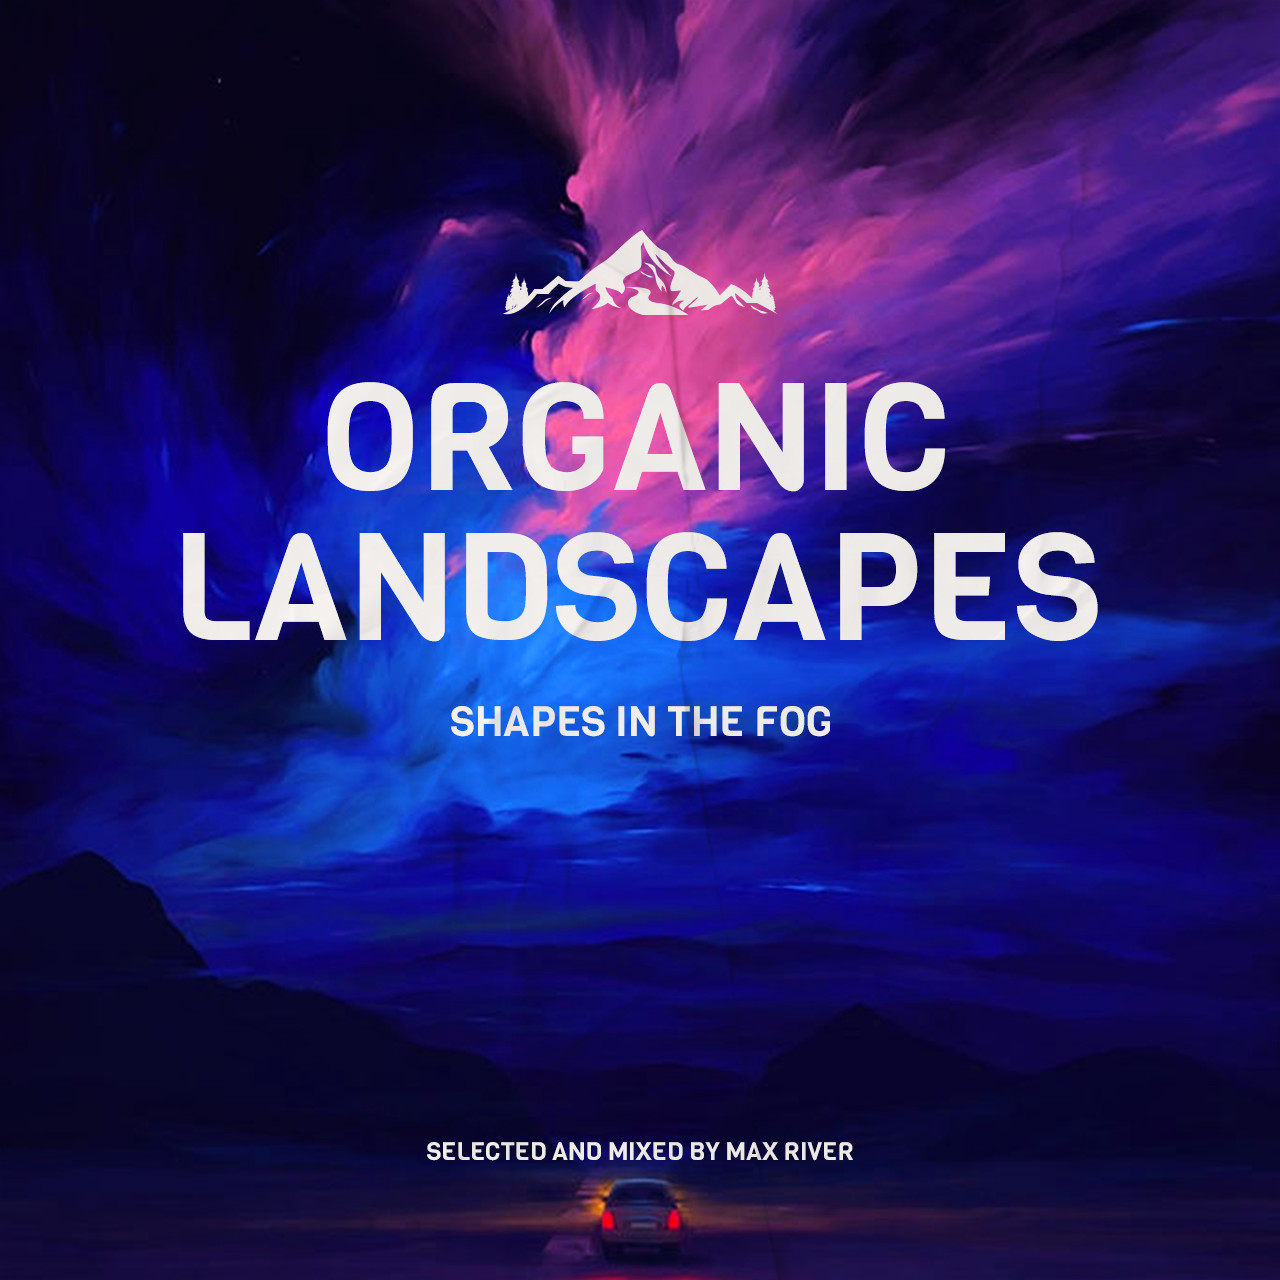 Max River - Organic Landscapes: Shapes in the Fog